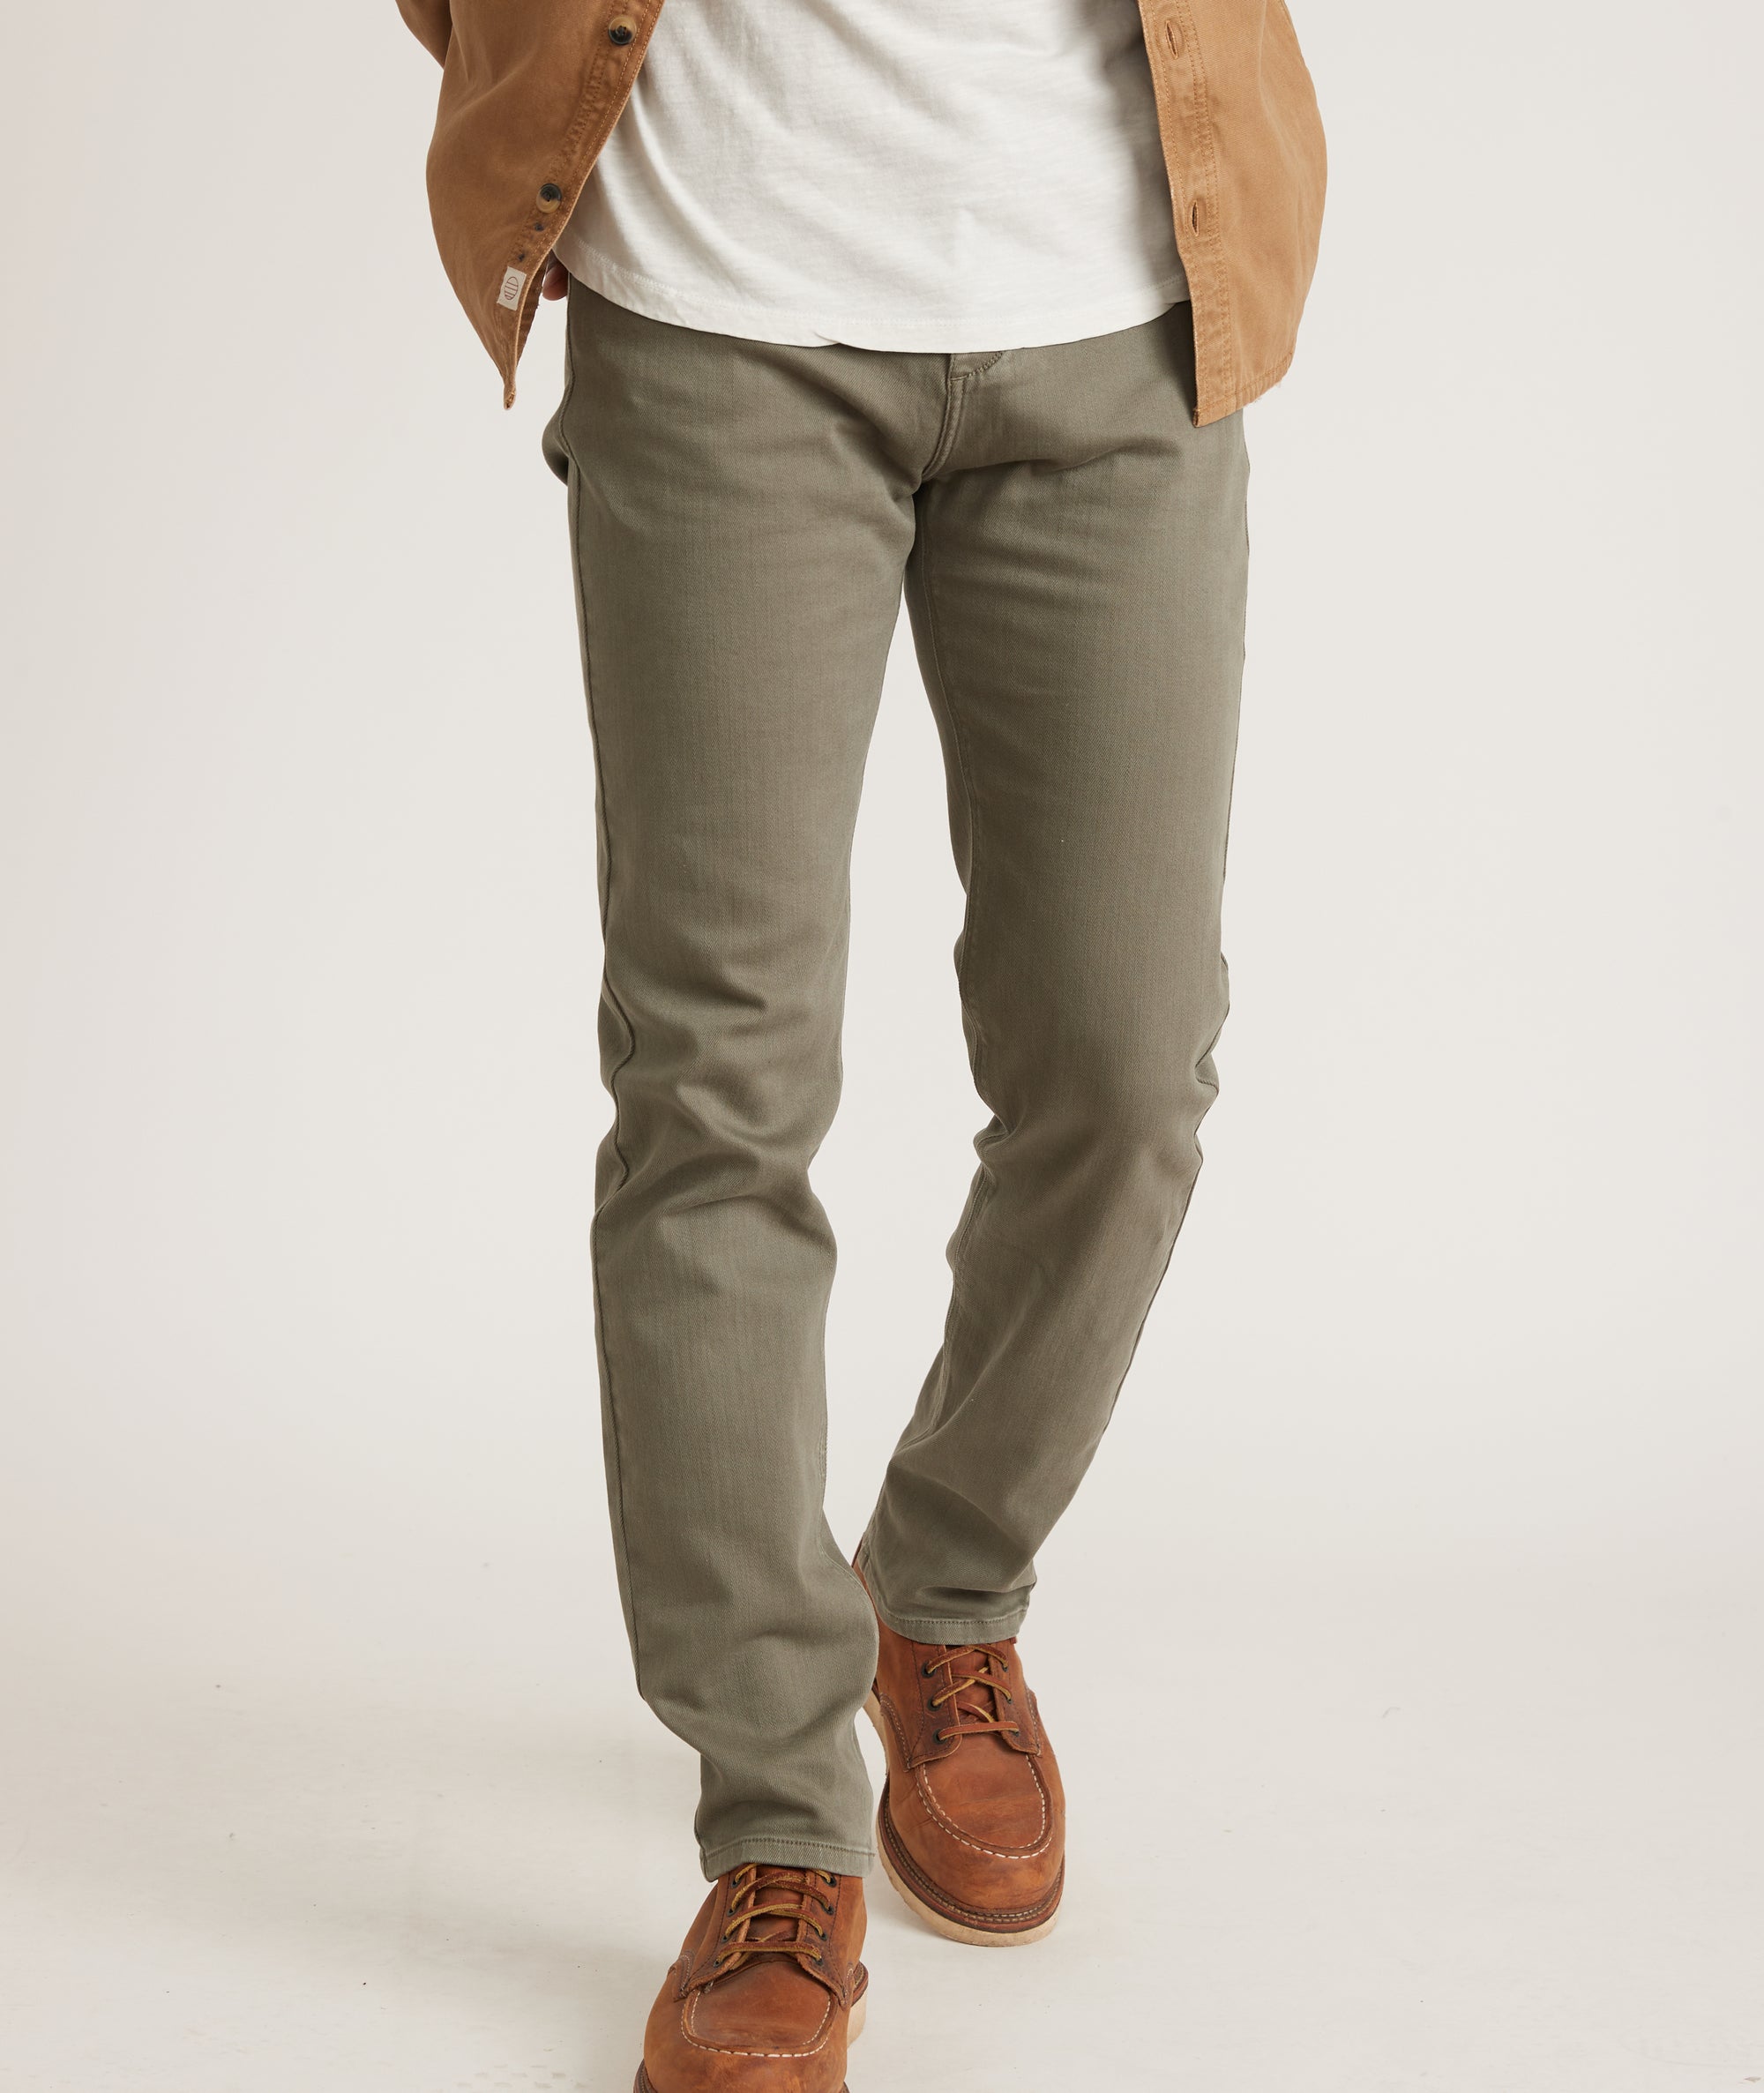 Olive Faded in Slim Fit Pocket Marine – 5 Pant Layer